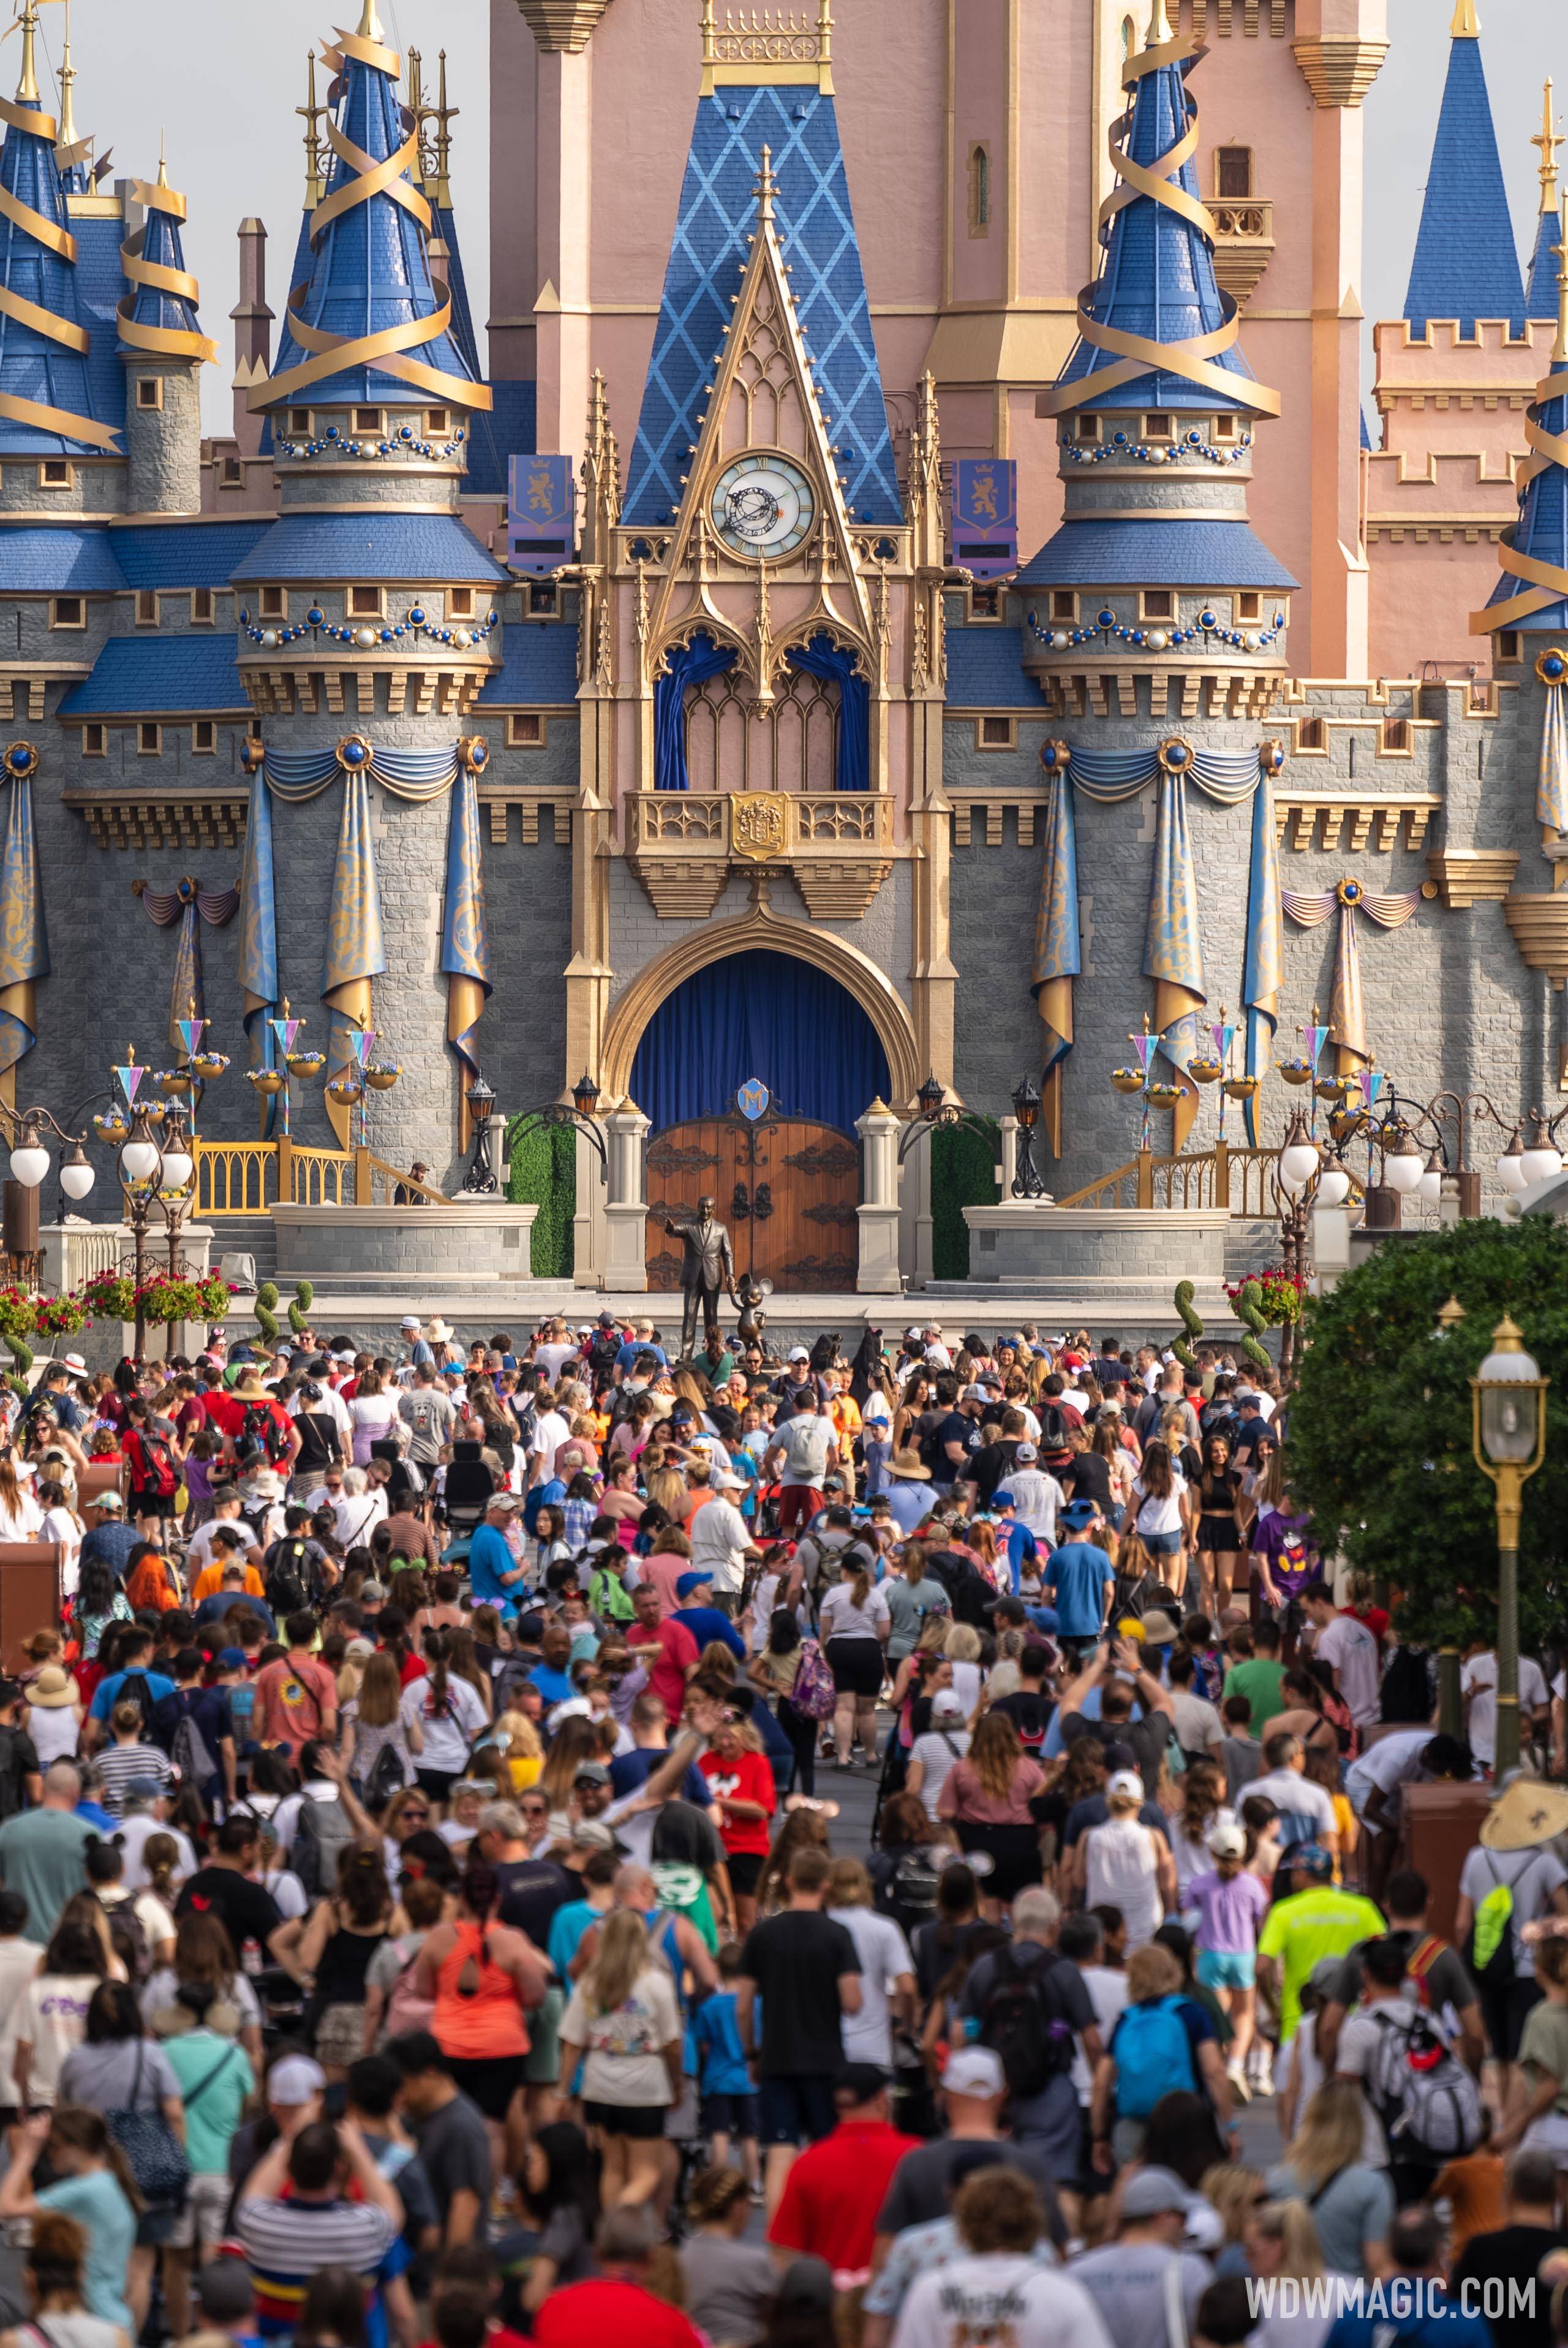 Magic Kingdom is having a busy day as spring break crowds continue